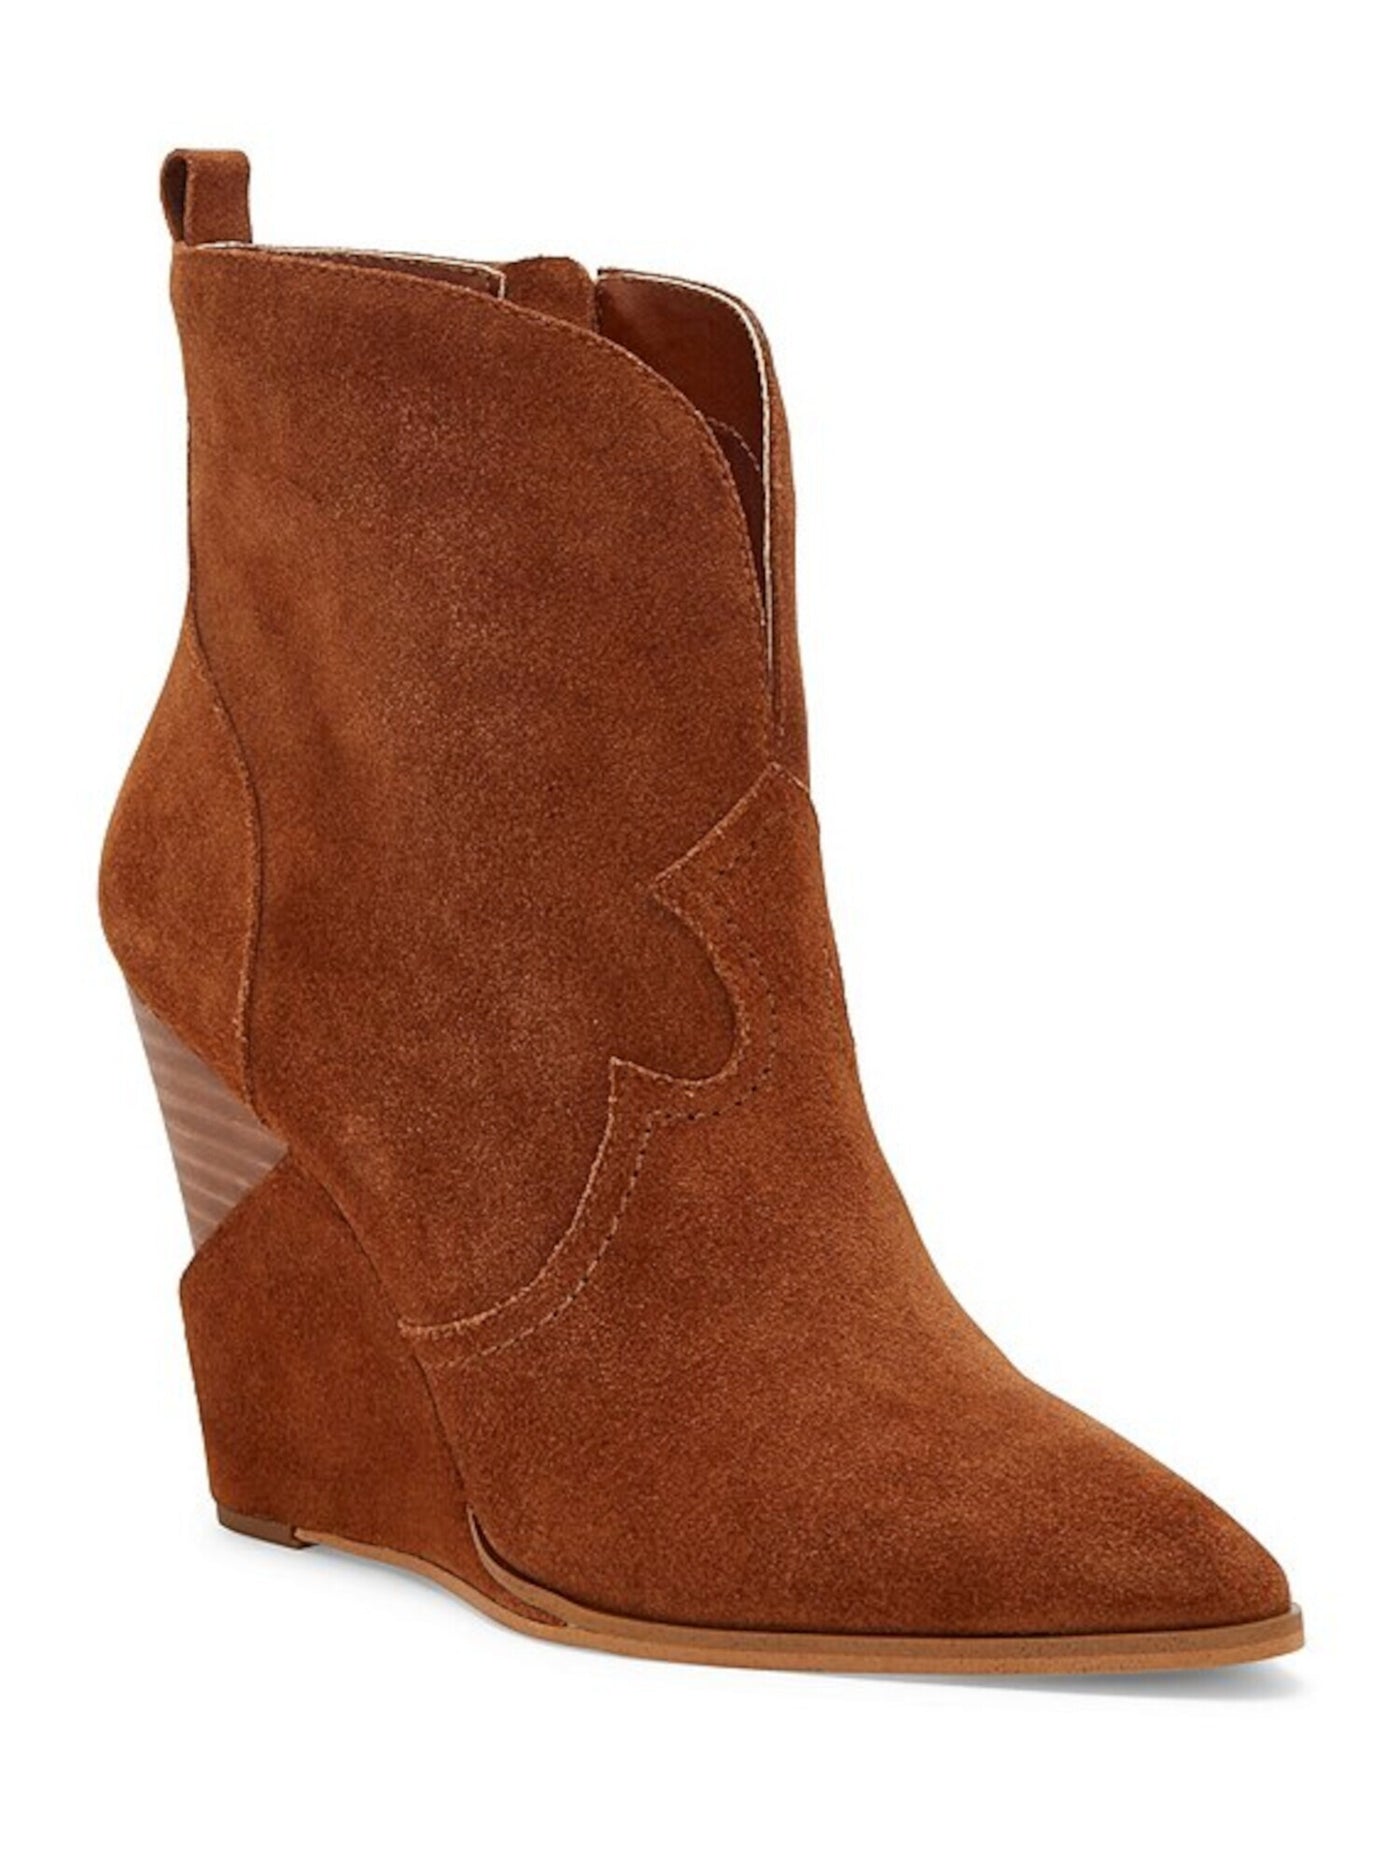 JESSICA SIMPSON Womens Brown Deep V Notch Pull Tab Comfort Hilrie Pointed Toe Wedge Zip-Up Leather Booties 8 M